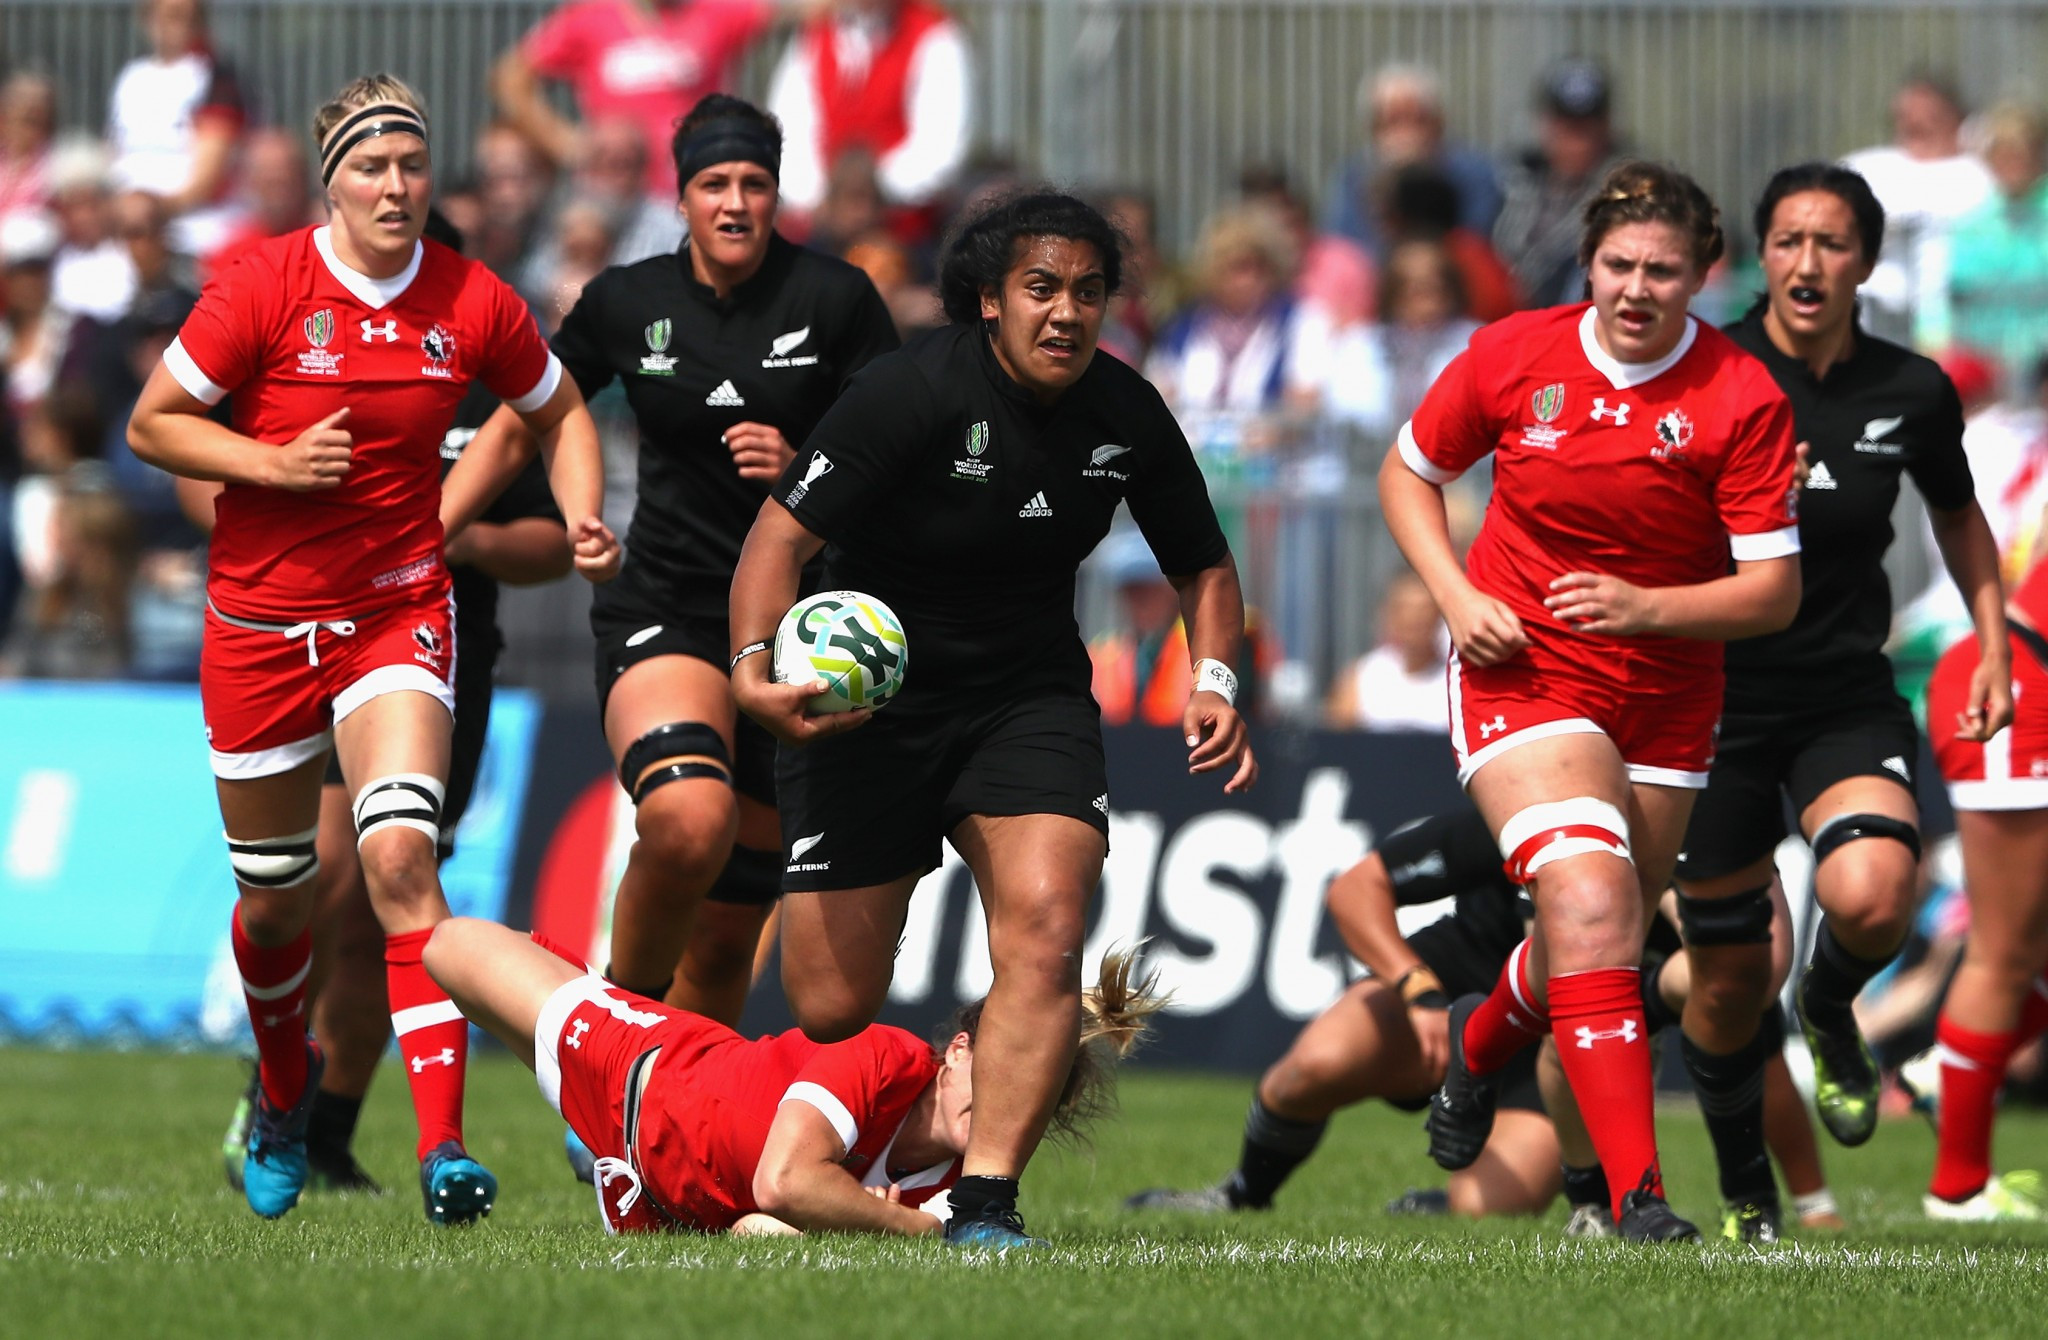 England and New Zealand among teams to book semi-final places at Women's Rugby World Cup